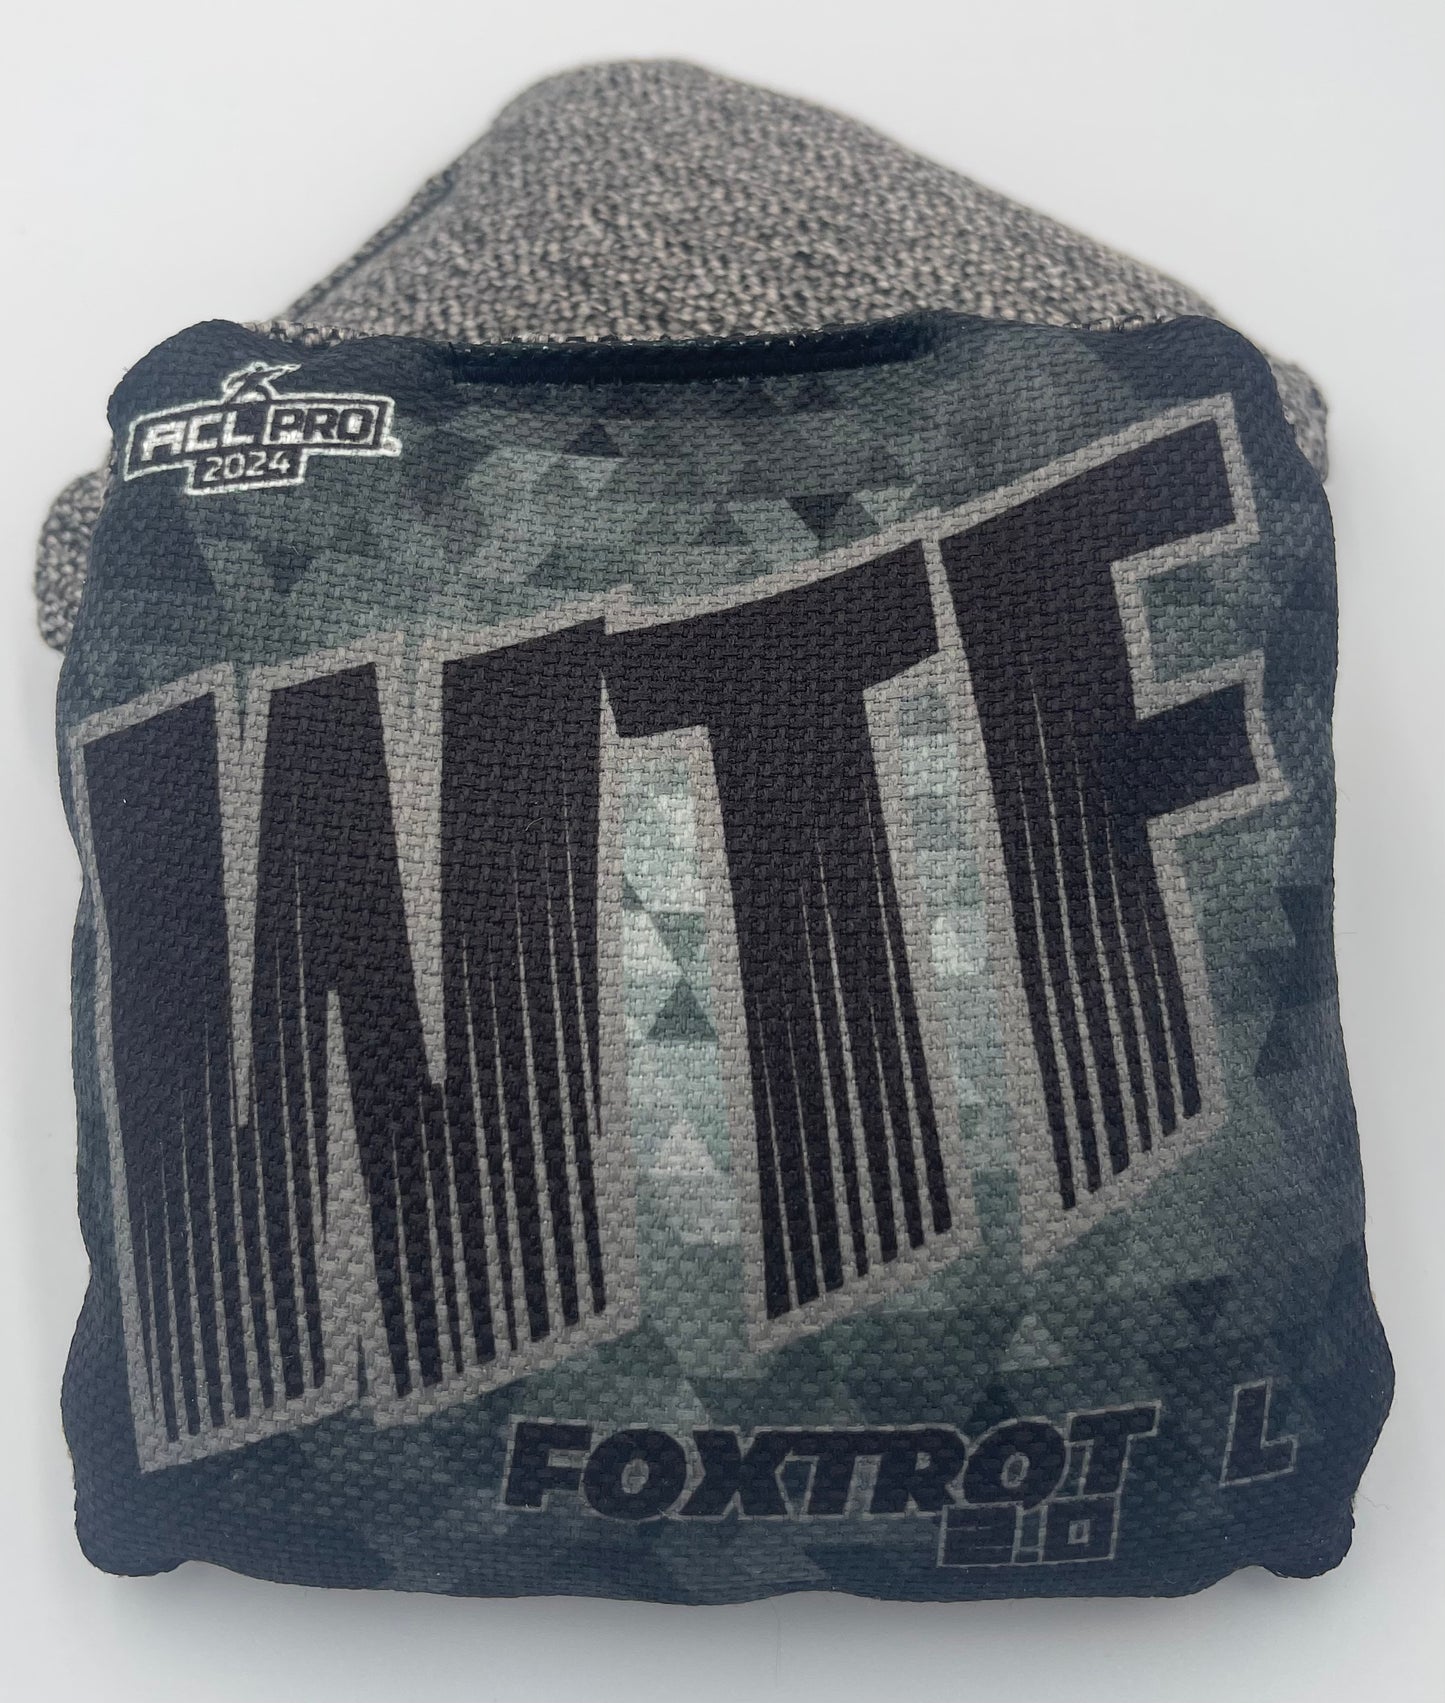 Foxtrot 2.0 L - ACL Pro Stamped Cornhole Bags - Set of 4 bags